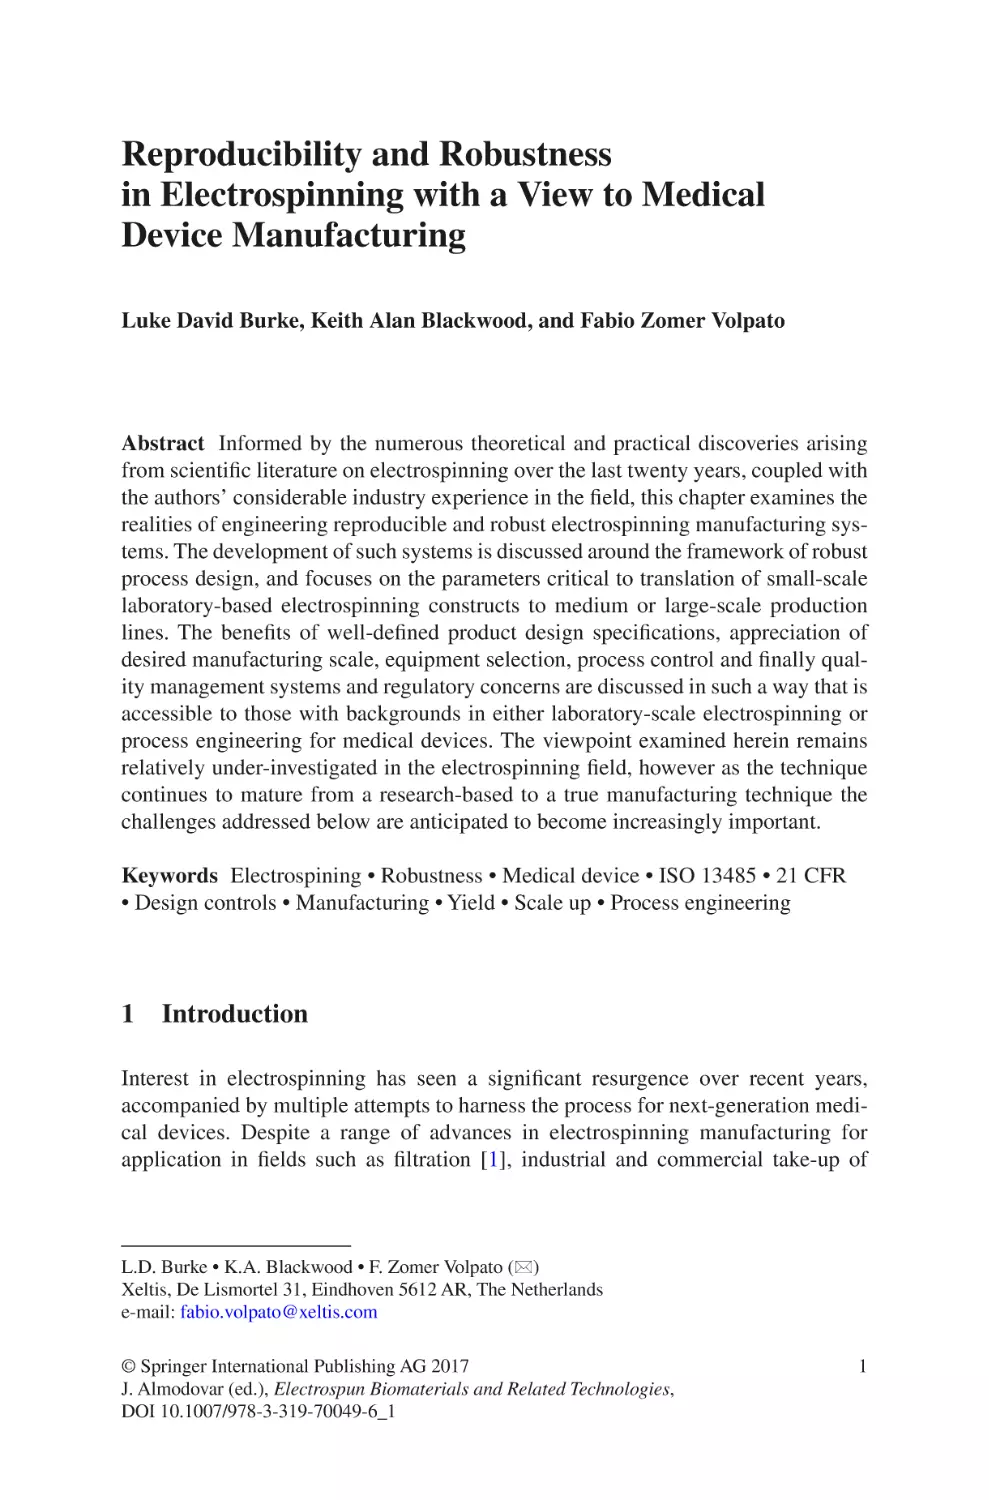 Reproducibility and Robustness in Electrospinning with a View to Medical Device Manufacturing
1 Introduction